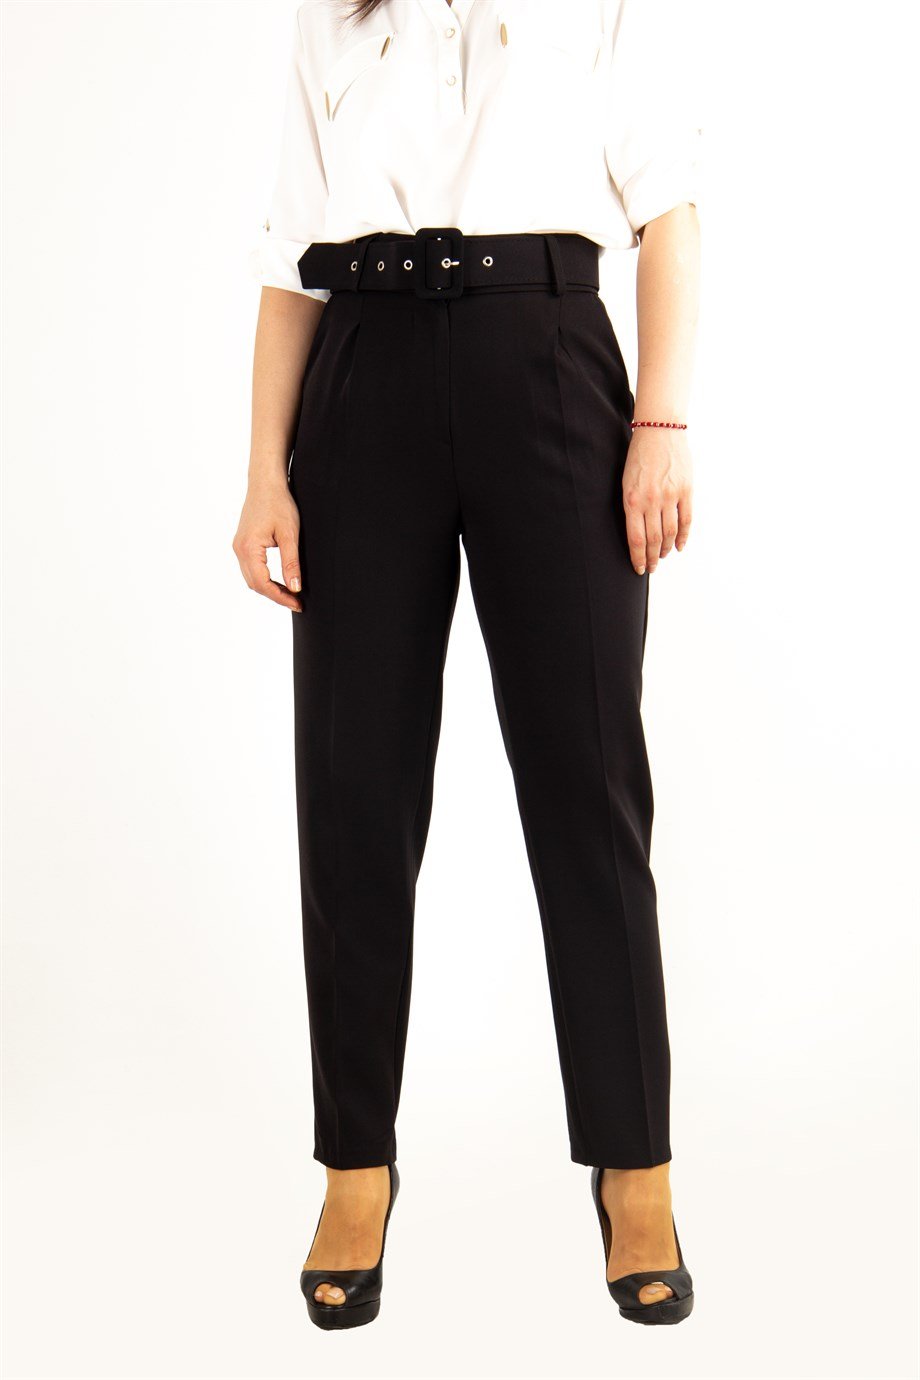 Buy Black Trousers & Pants for Women by GAS Online | Ajio.com